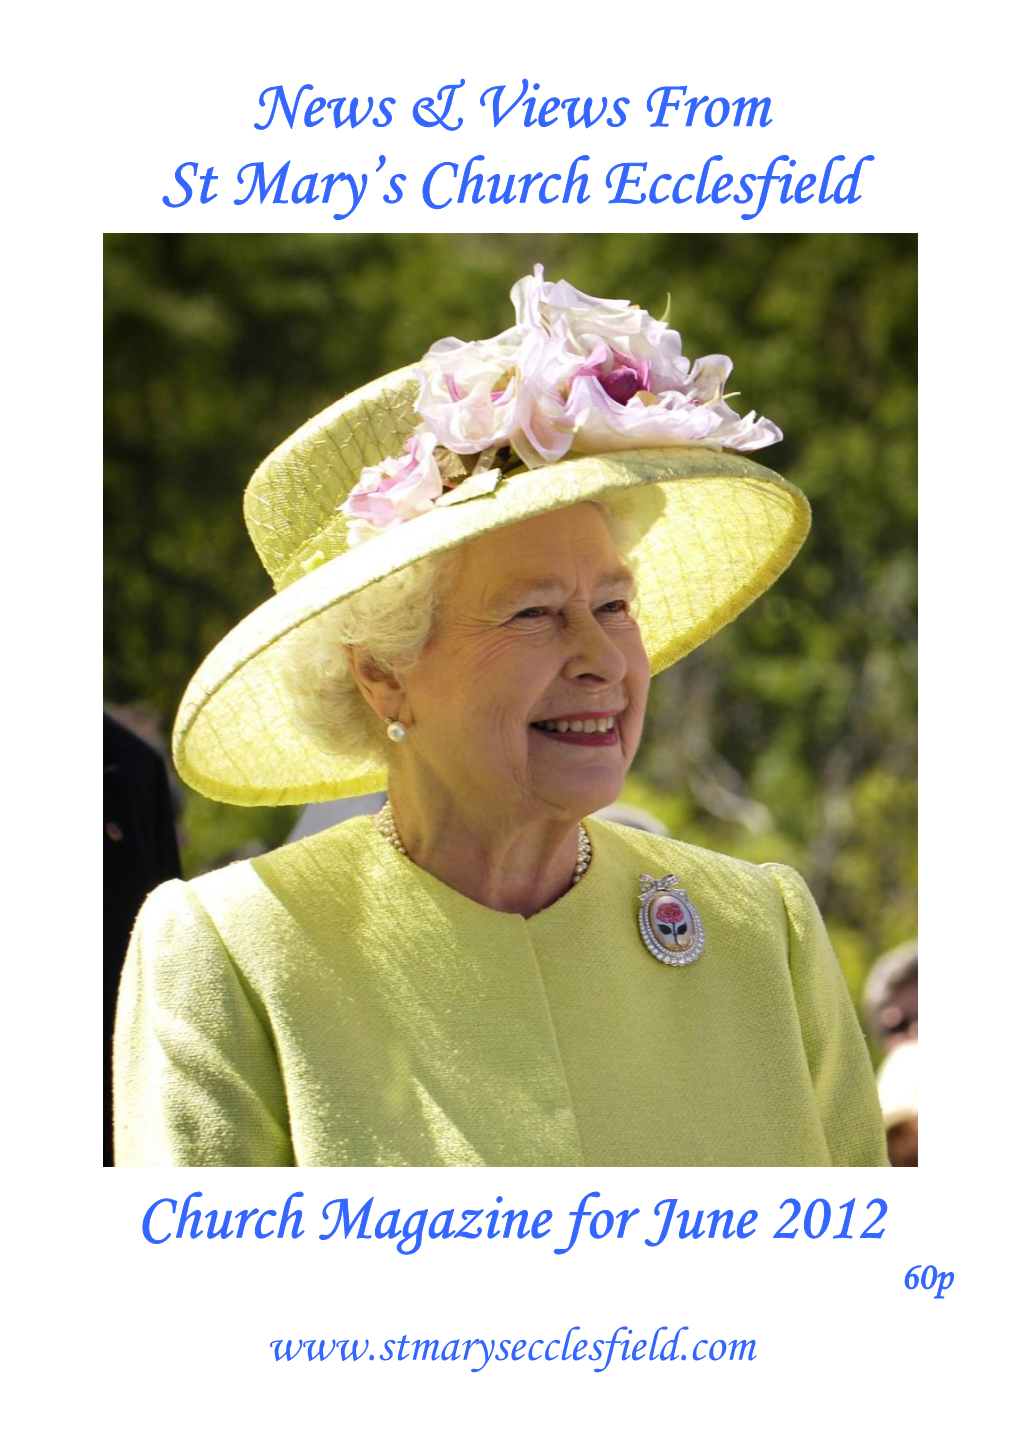 Front Cover – Queen Elizabeth II Greets NASA GSFC Employees, May 8, 2007 Back Cover – May Queens on Pentecost Sunday 2 the Gatty Memorial Hall